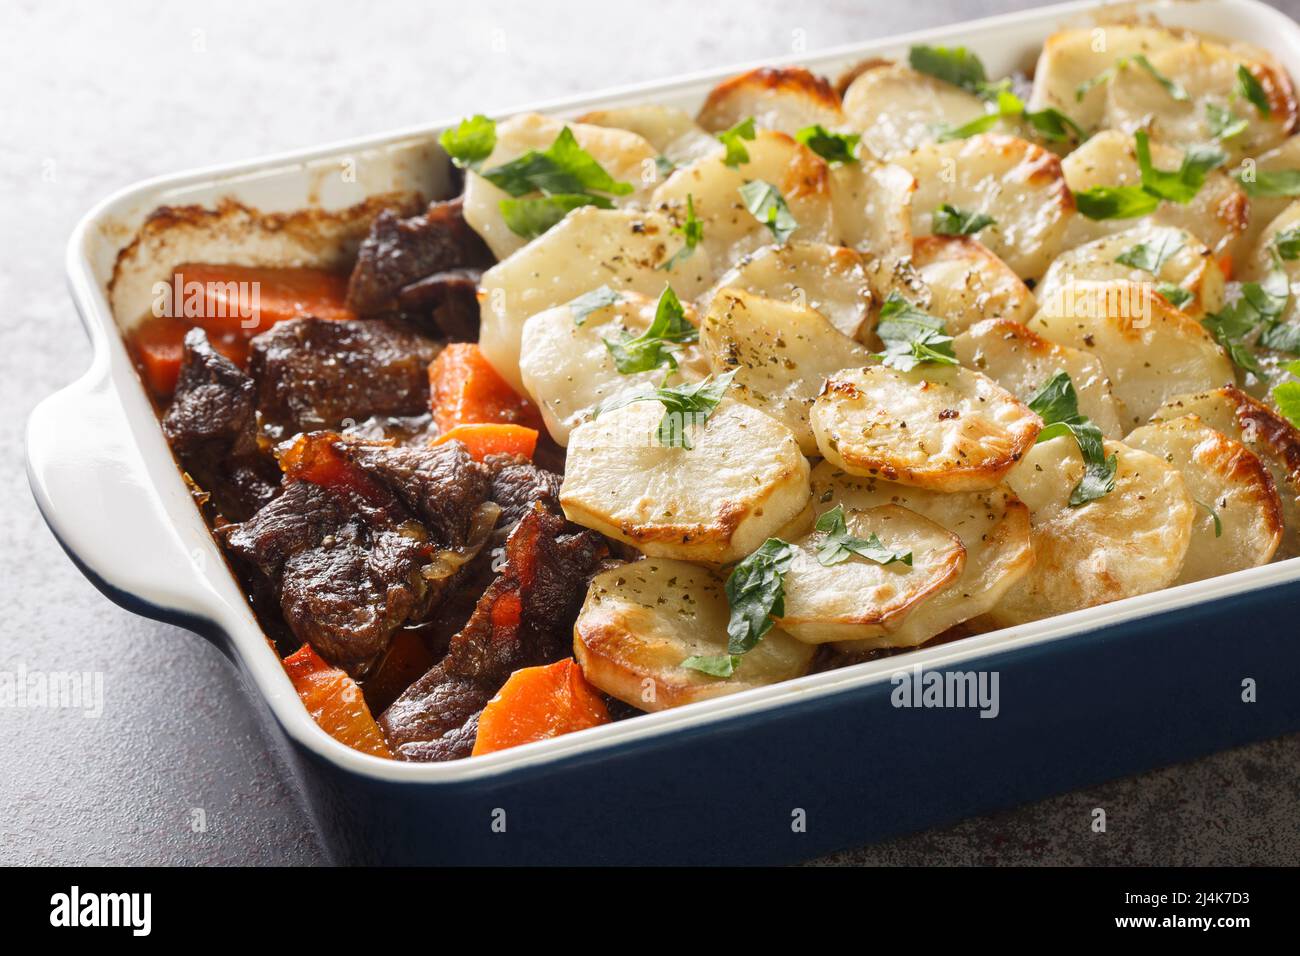 Lancashire Hot Pot, lamb and vegetables topped with sliced potatoes and oven baked closeup in the baking dish on the table. Horizontal Stock Photo